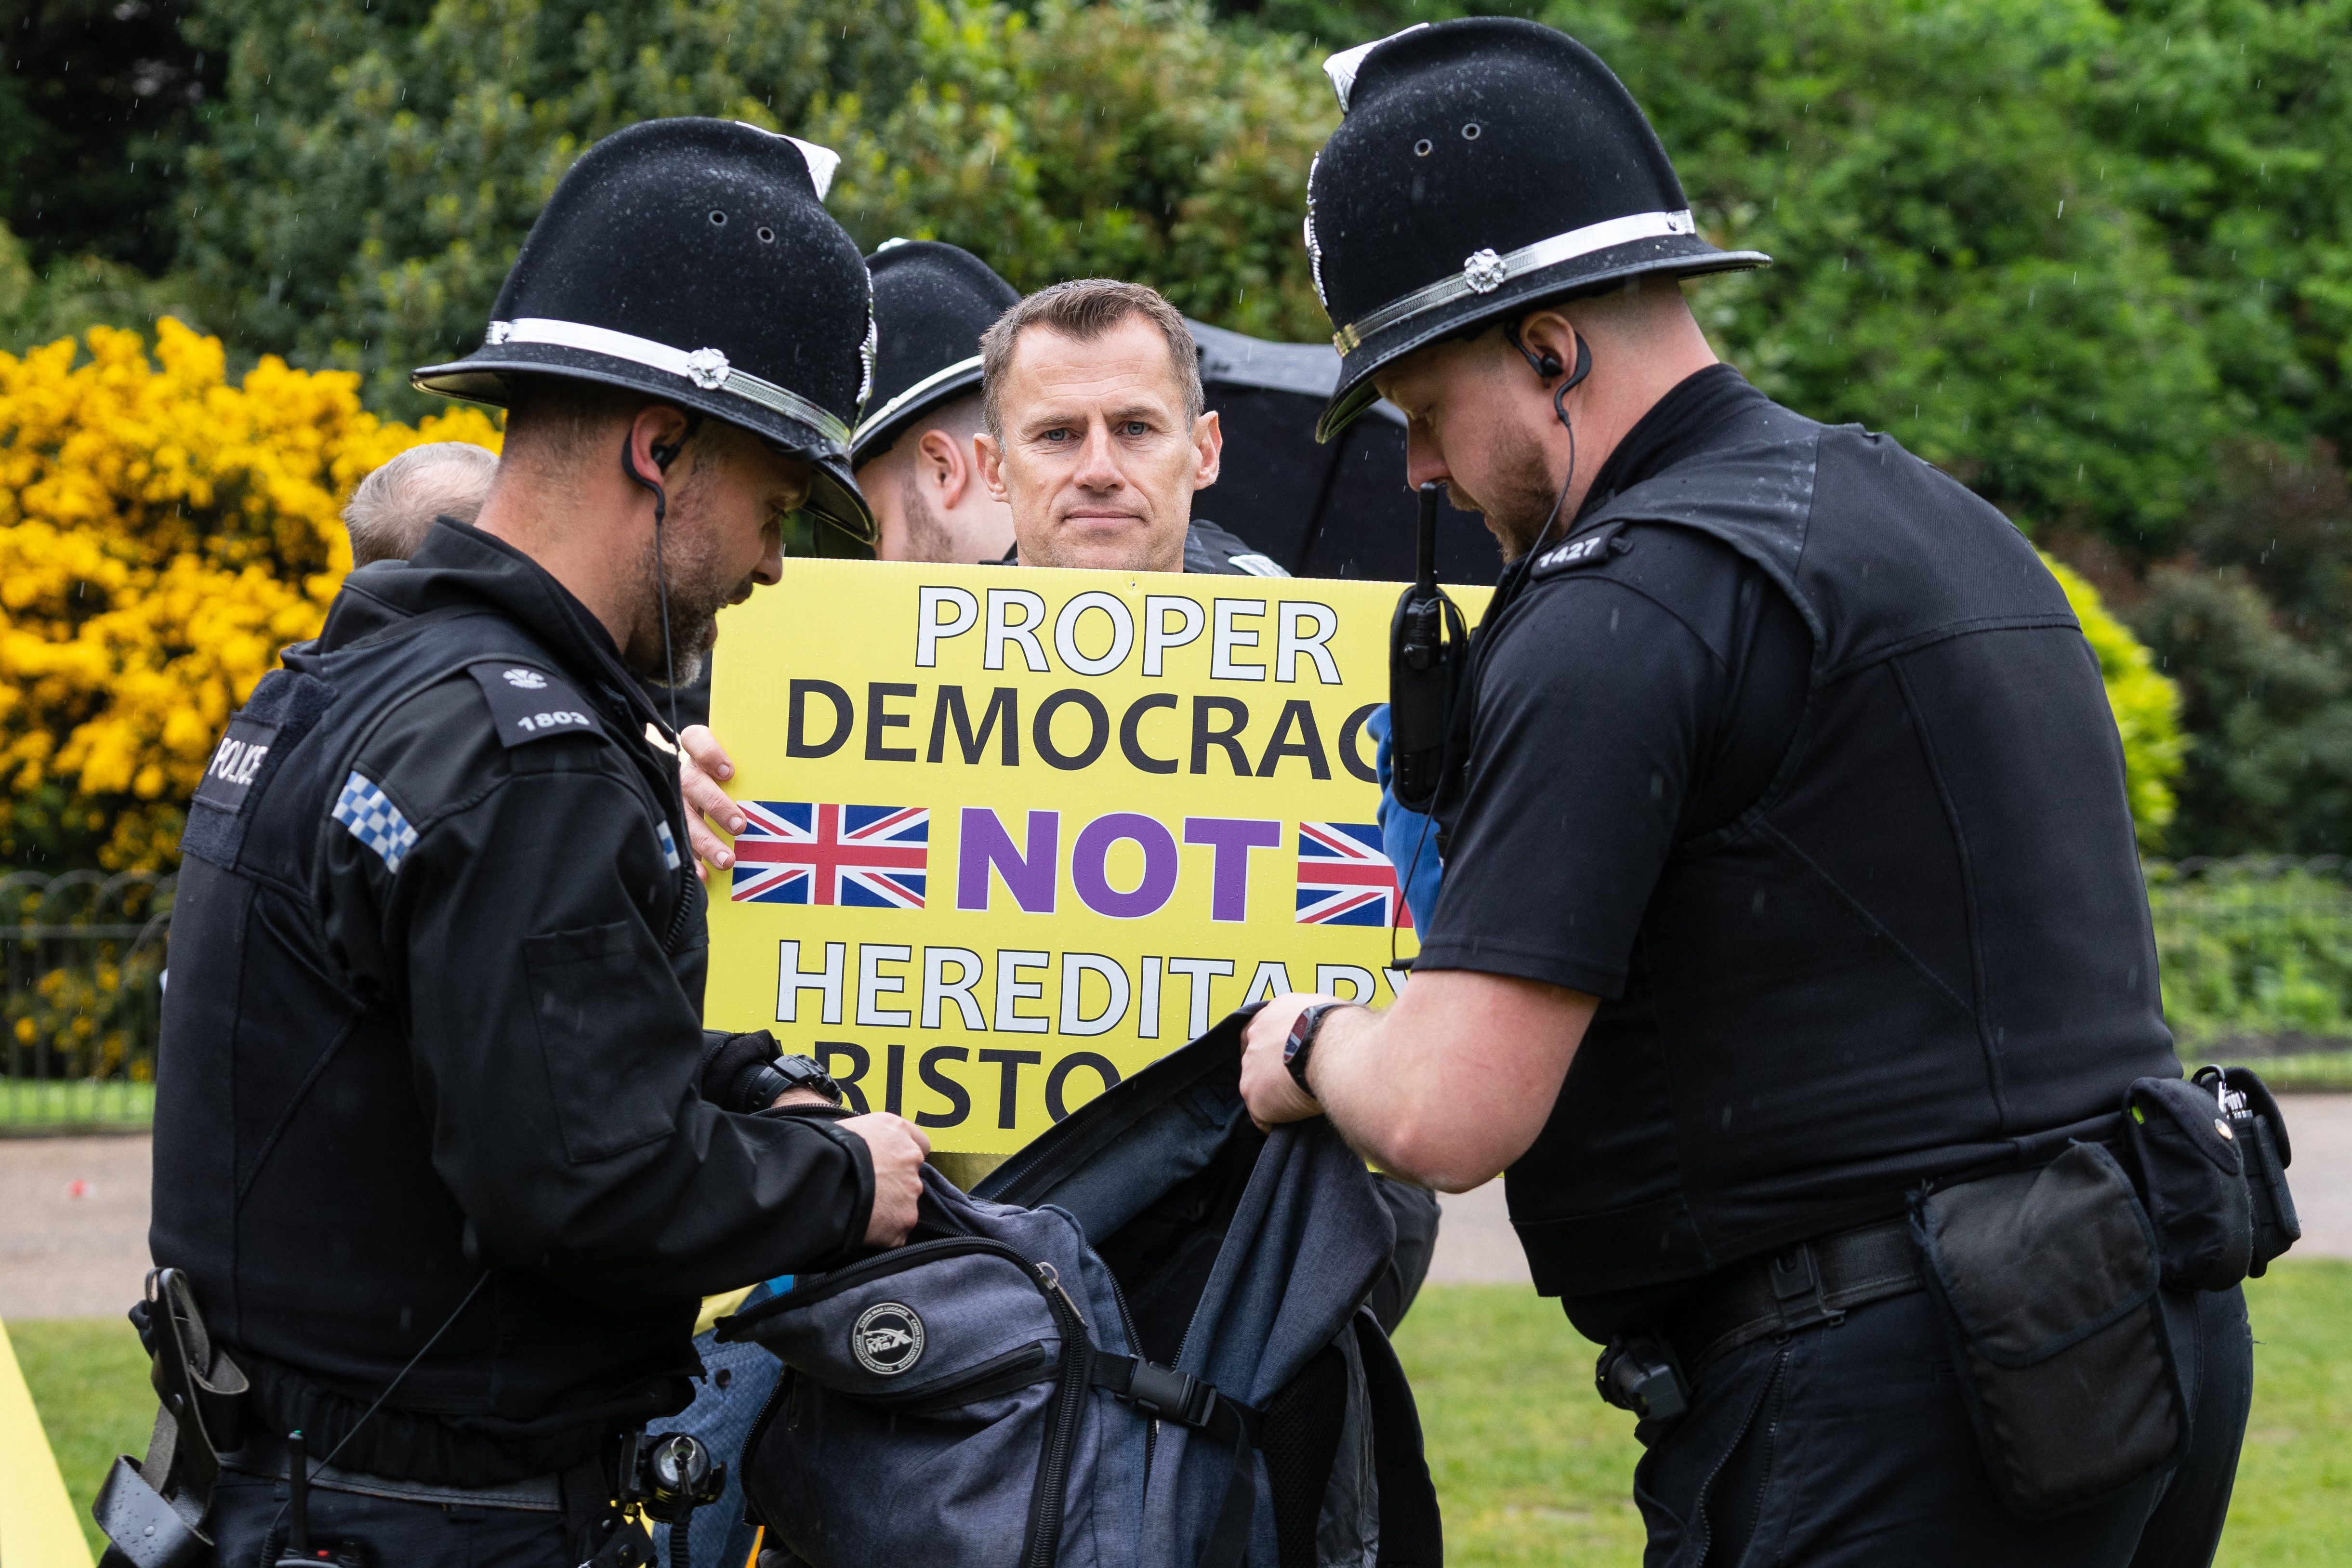 A member of the anti-monarchist group Republic is apprehended by police officers as they stage a protest close to where Britain's King Charles III 